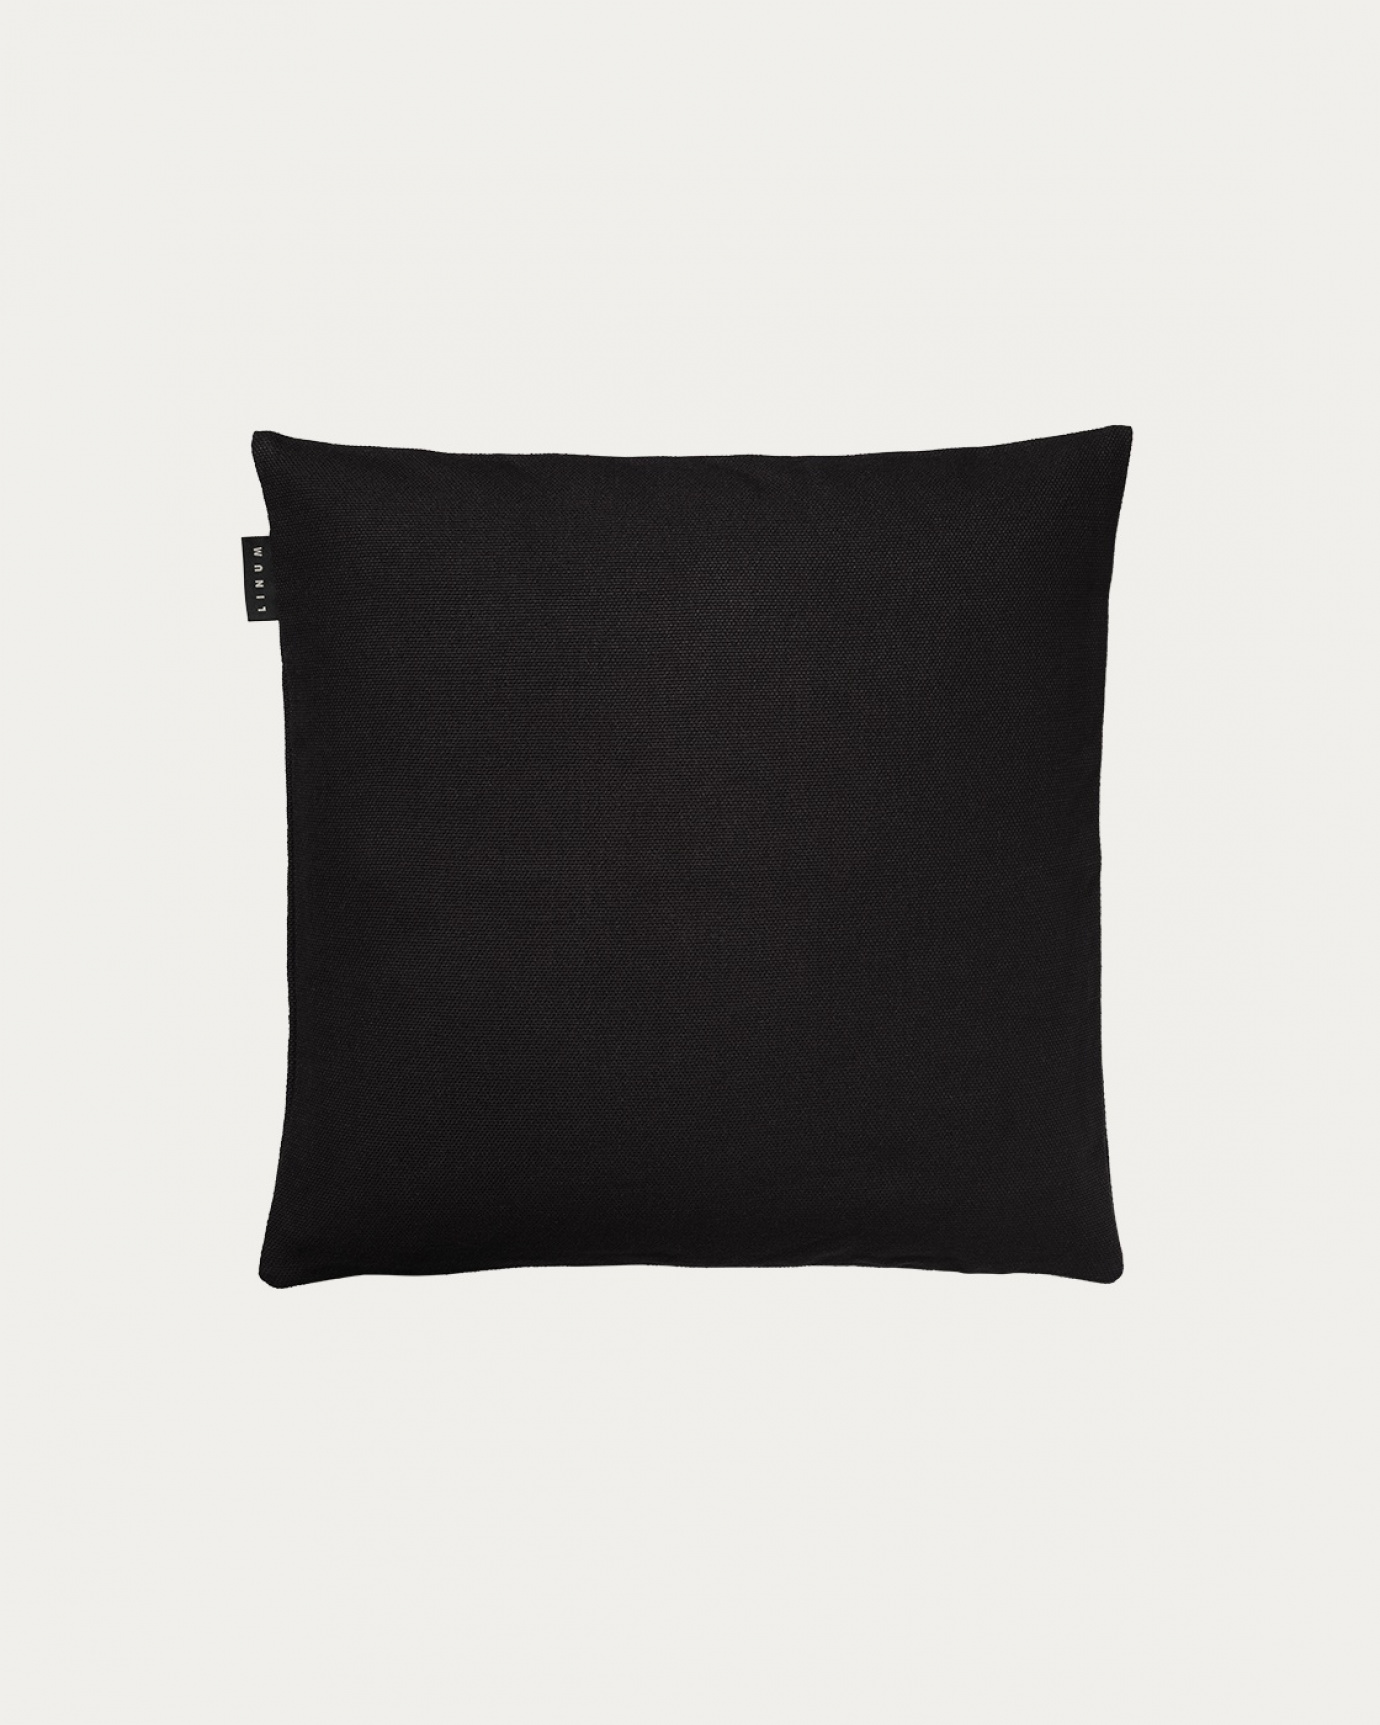 Product image black PEPPER cushion cover made of soft cotton from LINUM DESIGN. Easy to wash and durable for generations. Size 40x40 cm.